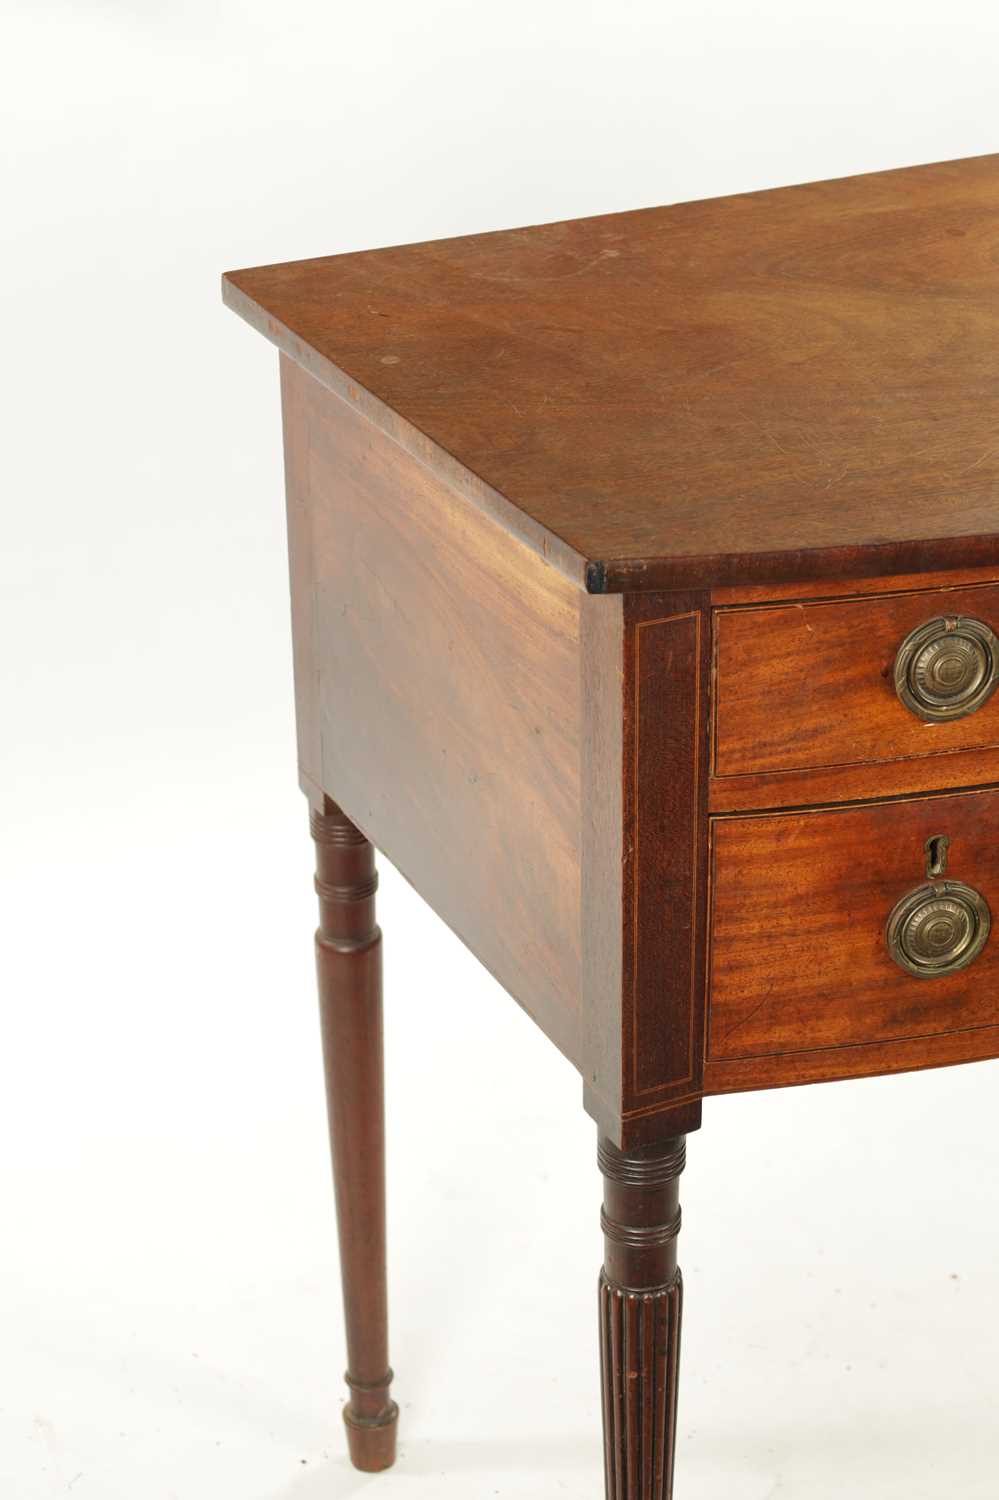 A REGENCY GILLOWS STYLE MAHOGANY BOW FRONTED SIDE TABLE - Image 3 of 5